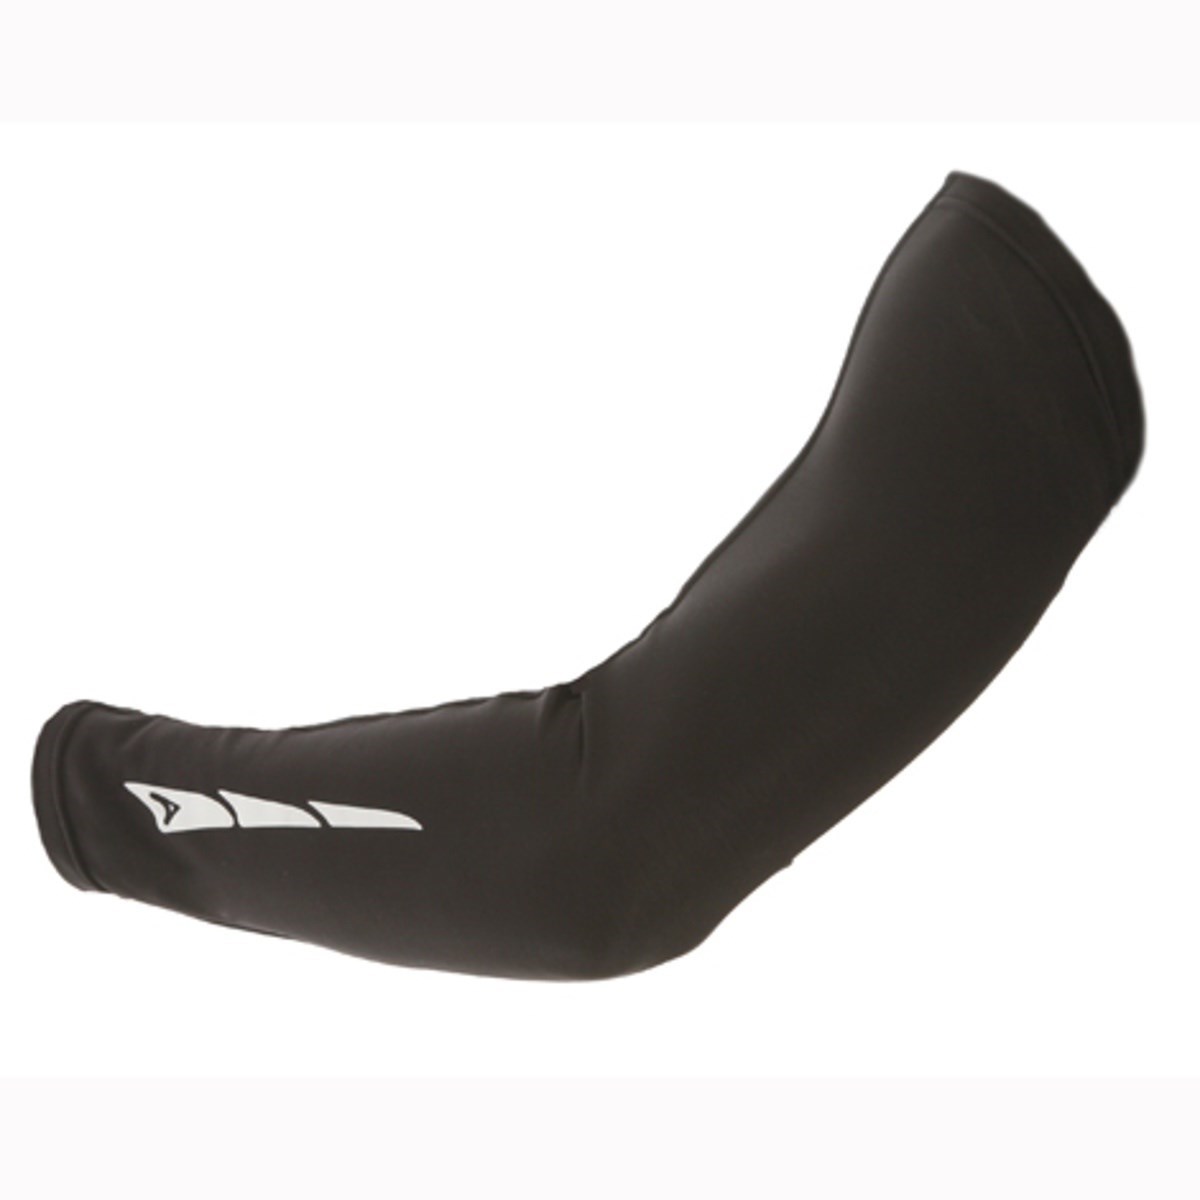 Altura Reflex Cycling Arm Warmers 2010 product image